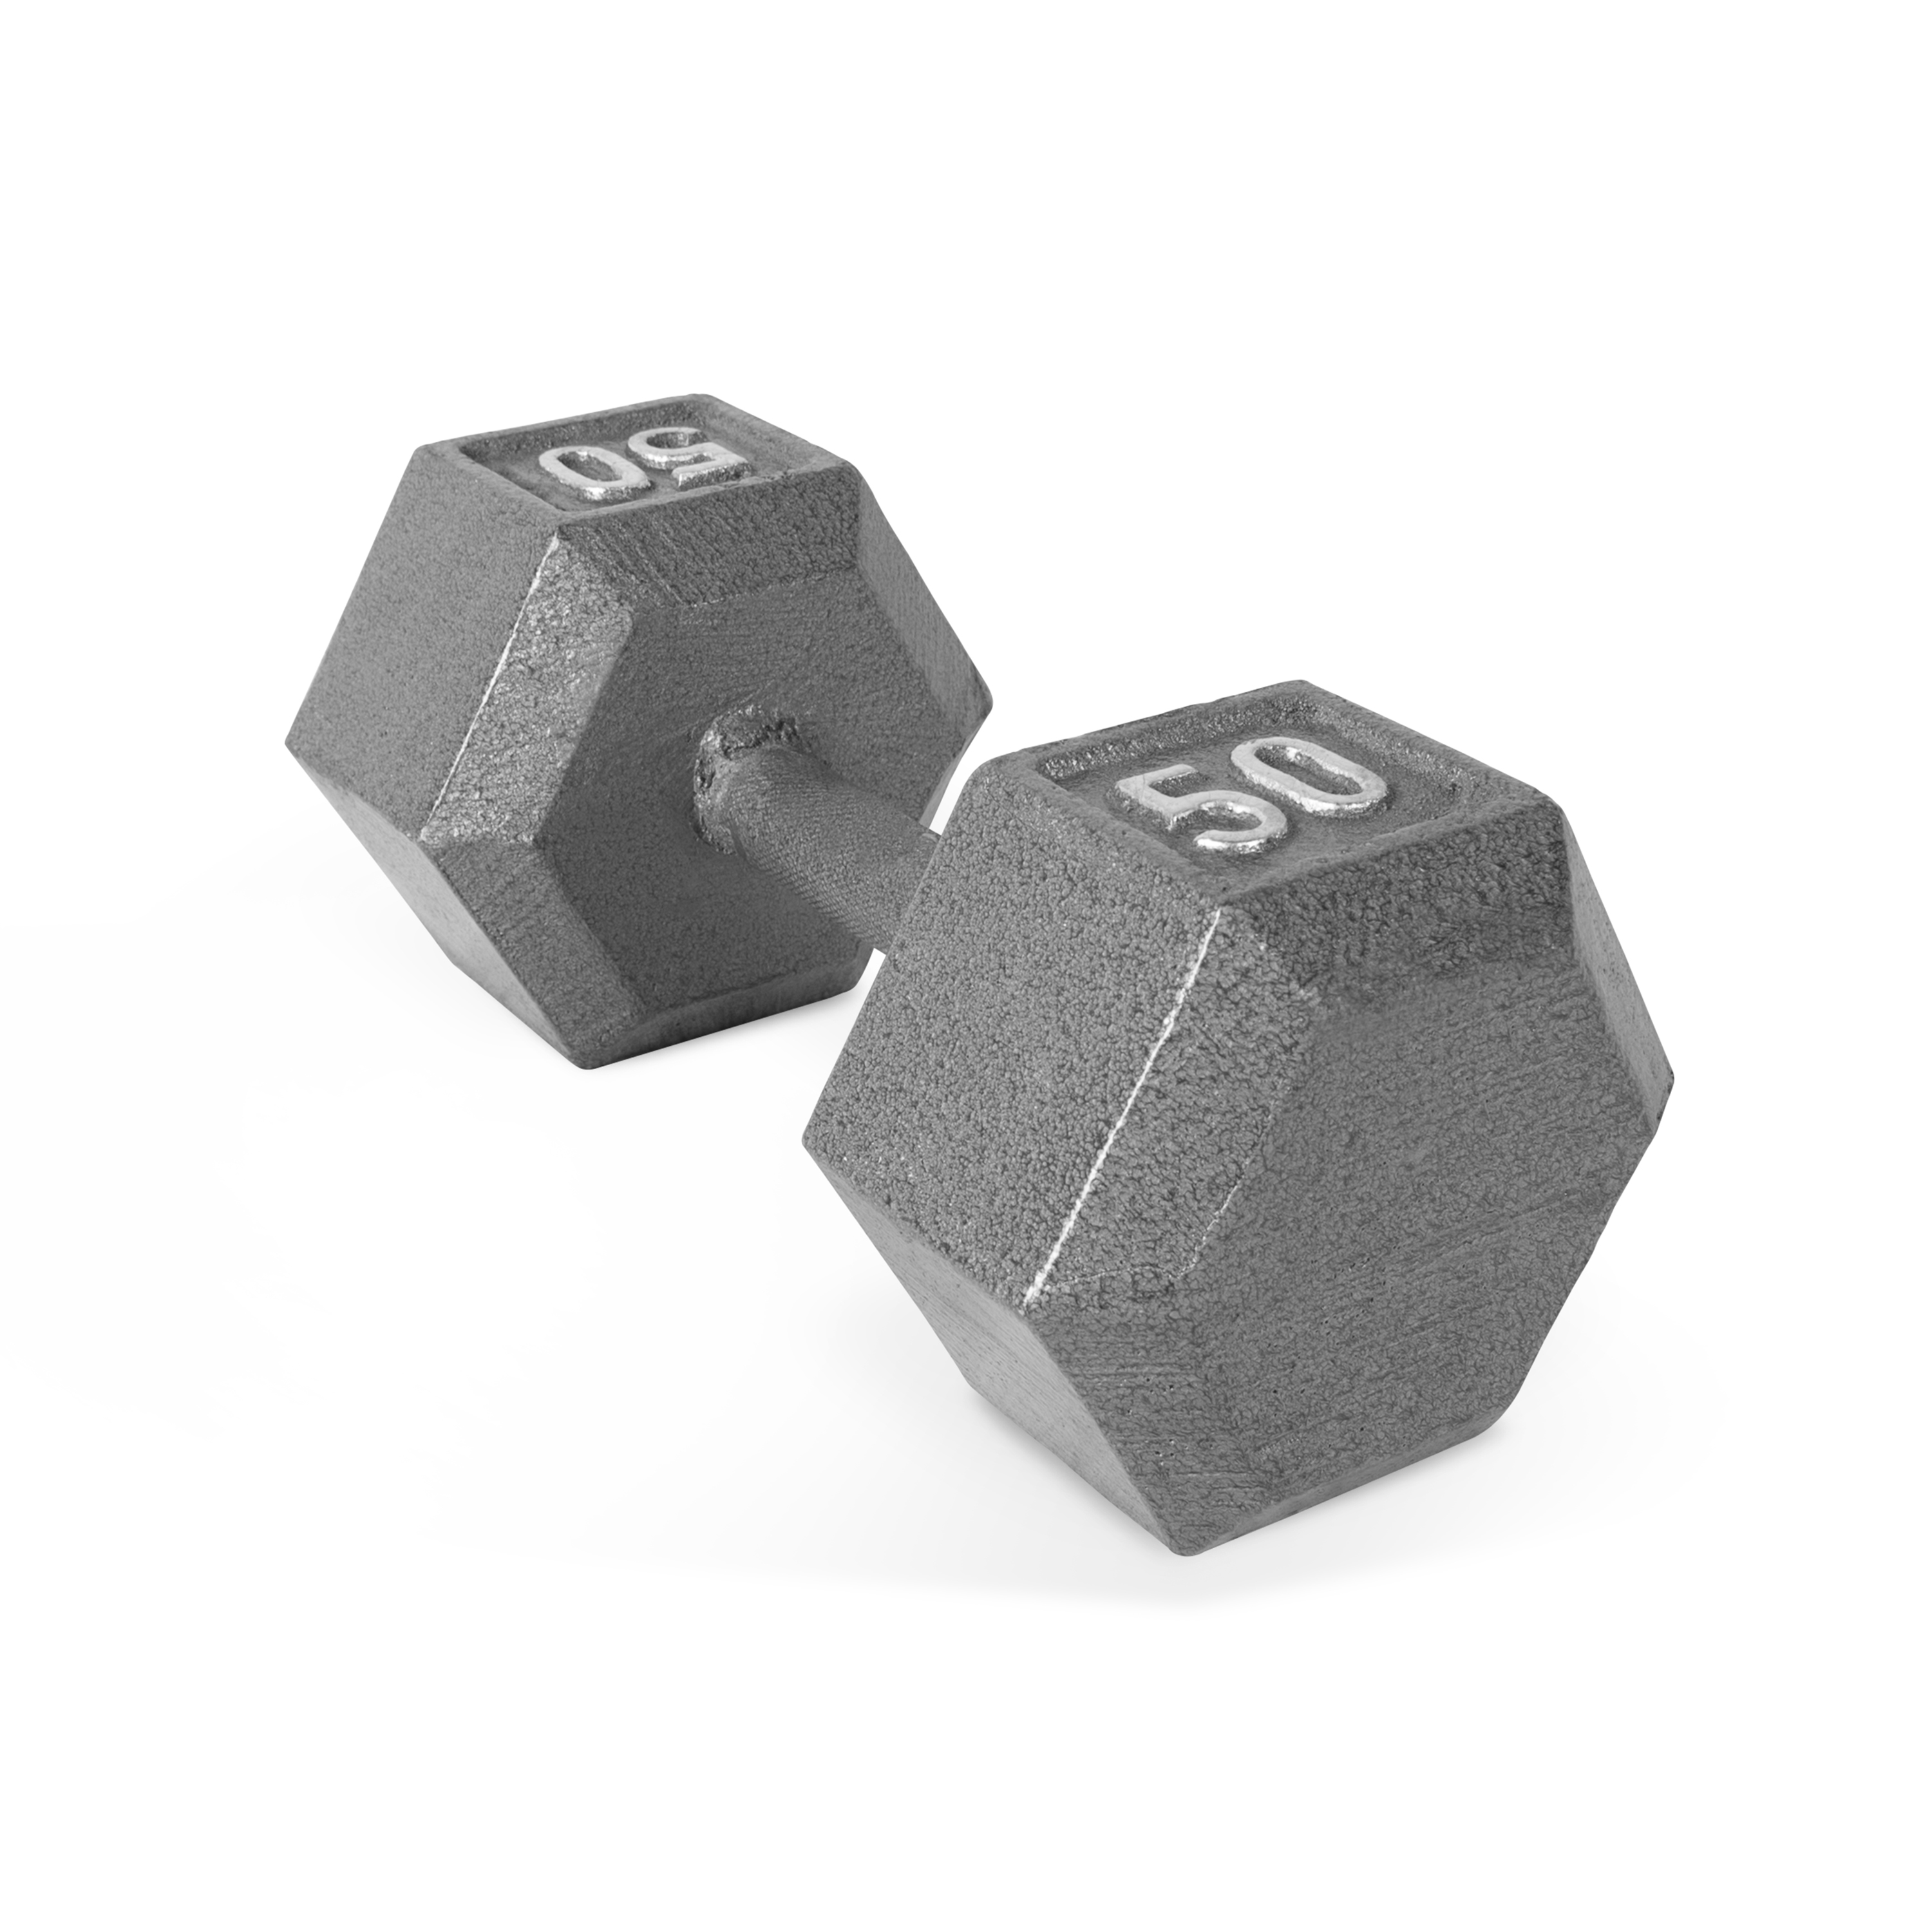 CAP Barbell 50lb Cast Iron Hex Dumbbell, Single - image 1 of 6